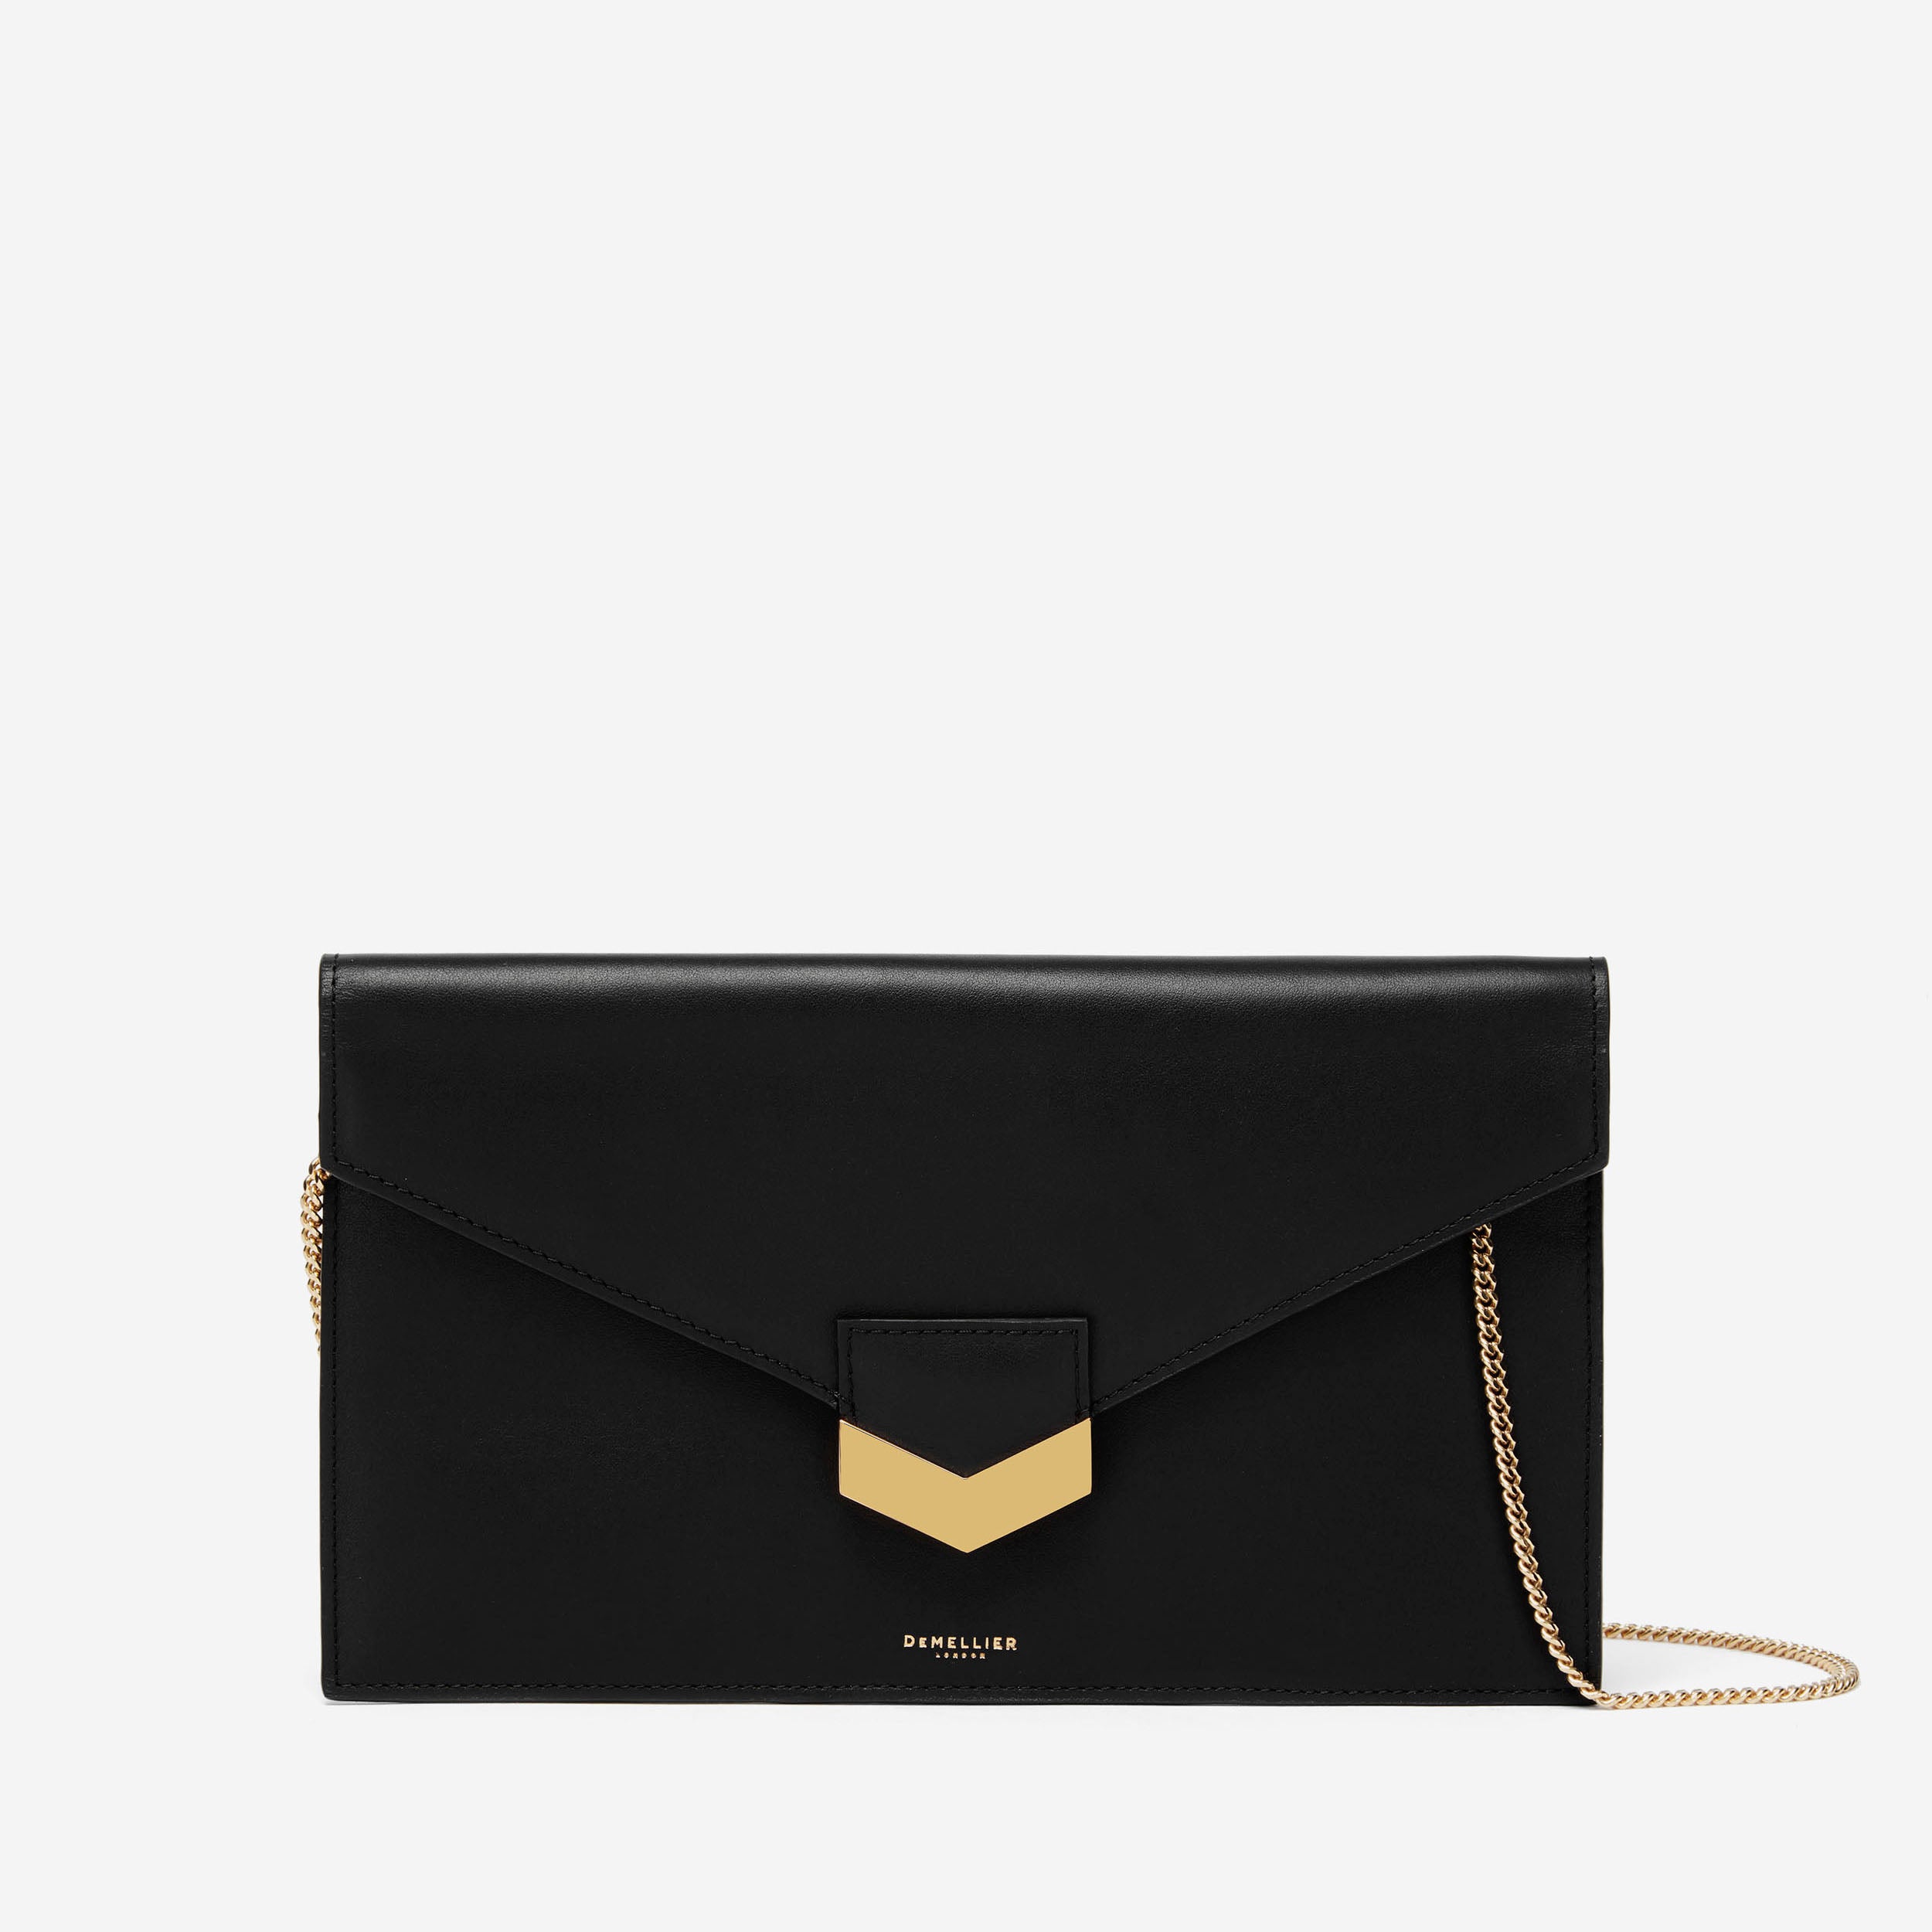 Perfect Black & Gold Perfect Sequin Envelope Clutch